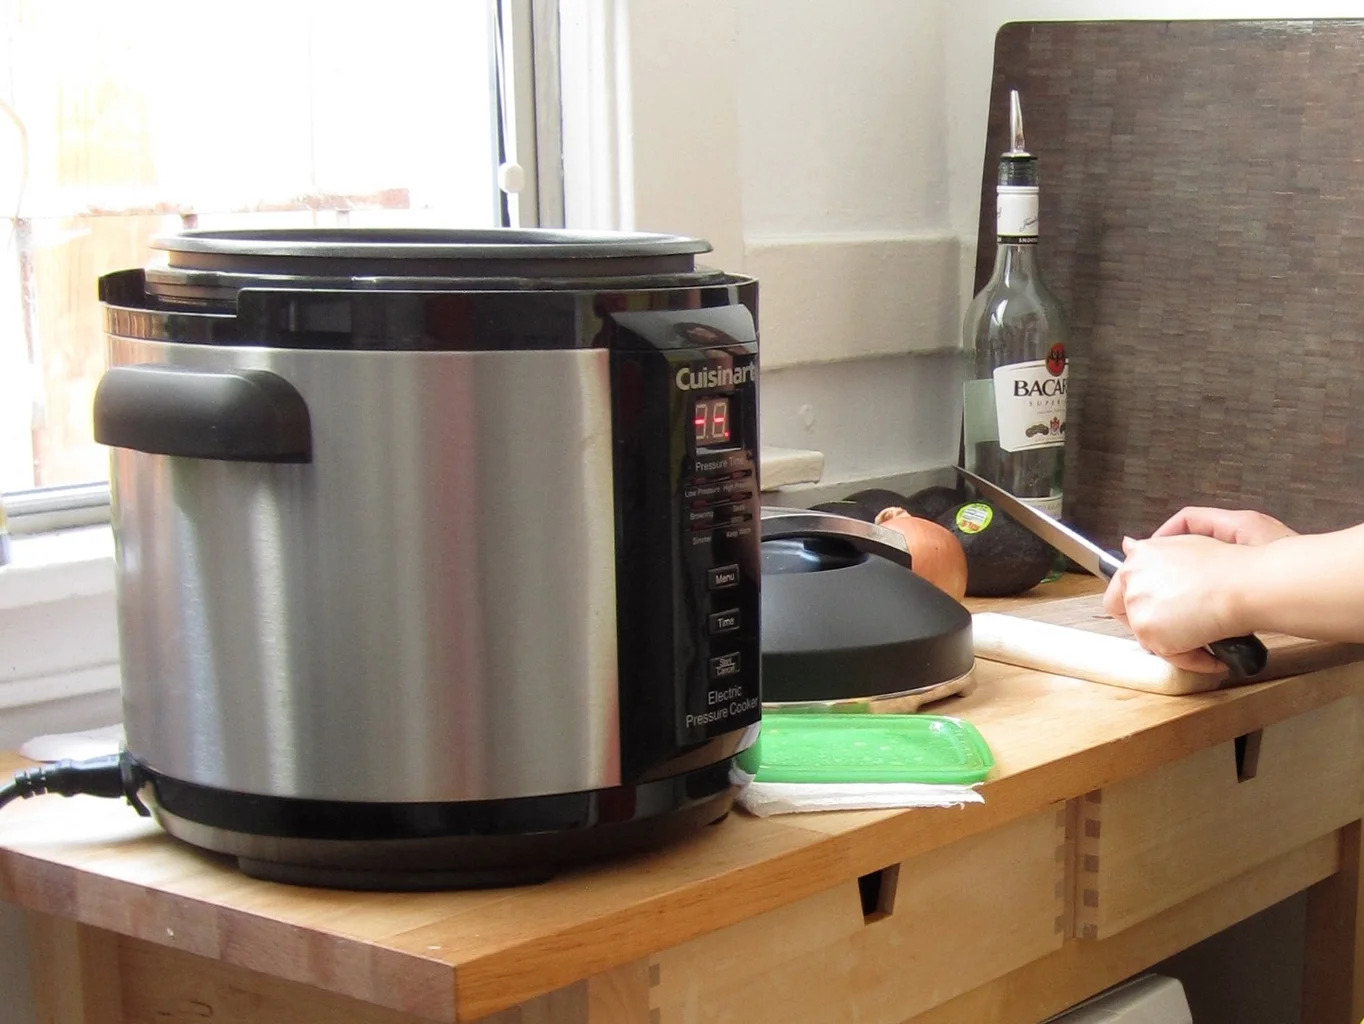 How To Cook With Cuisinart Electric Pressure Cooker